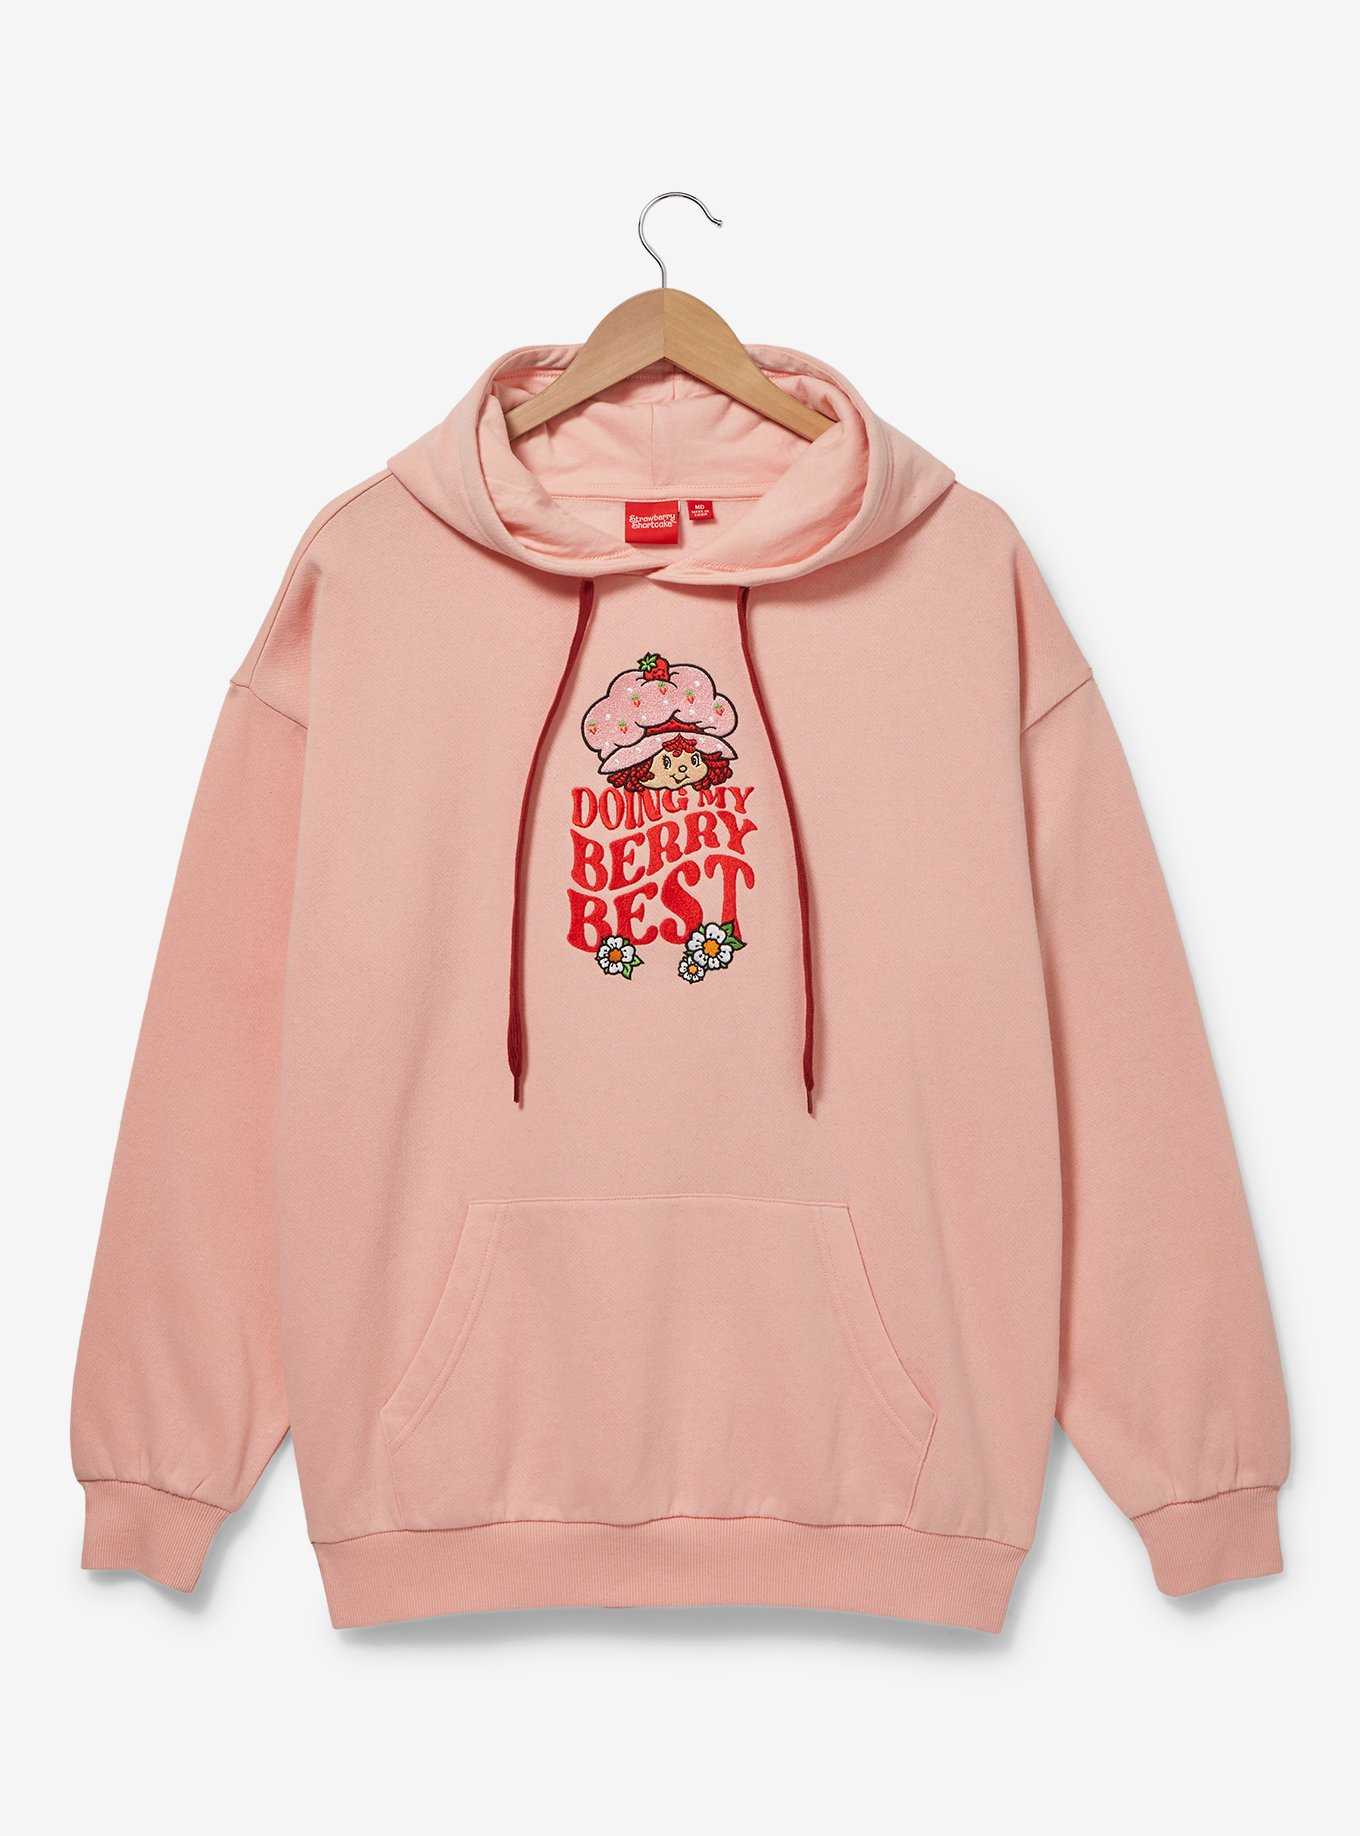 Strawberry Shortcake Doing My Berry Best Hoodie - BoxLunch Exclusive, , hi-res